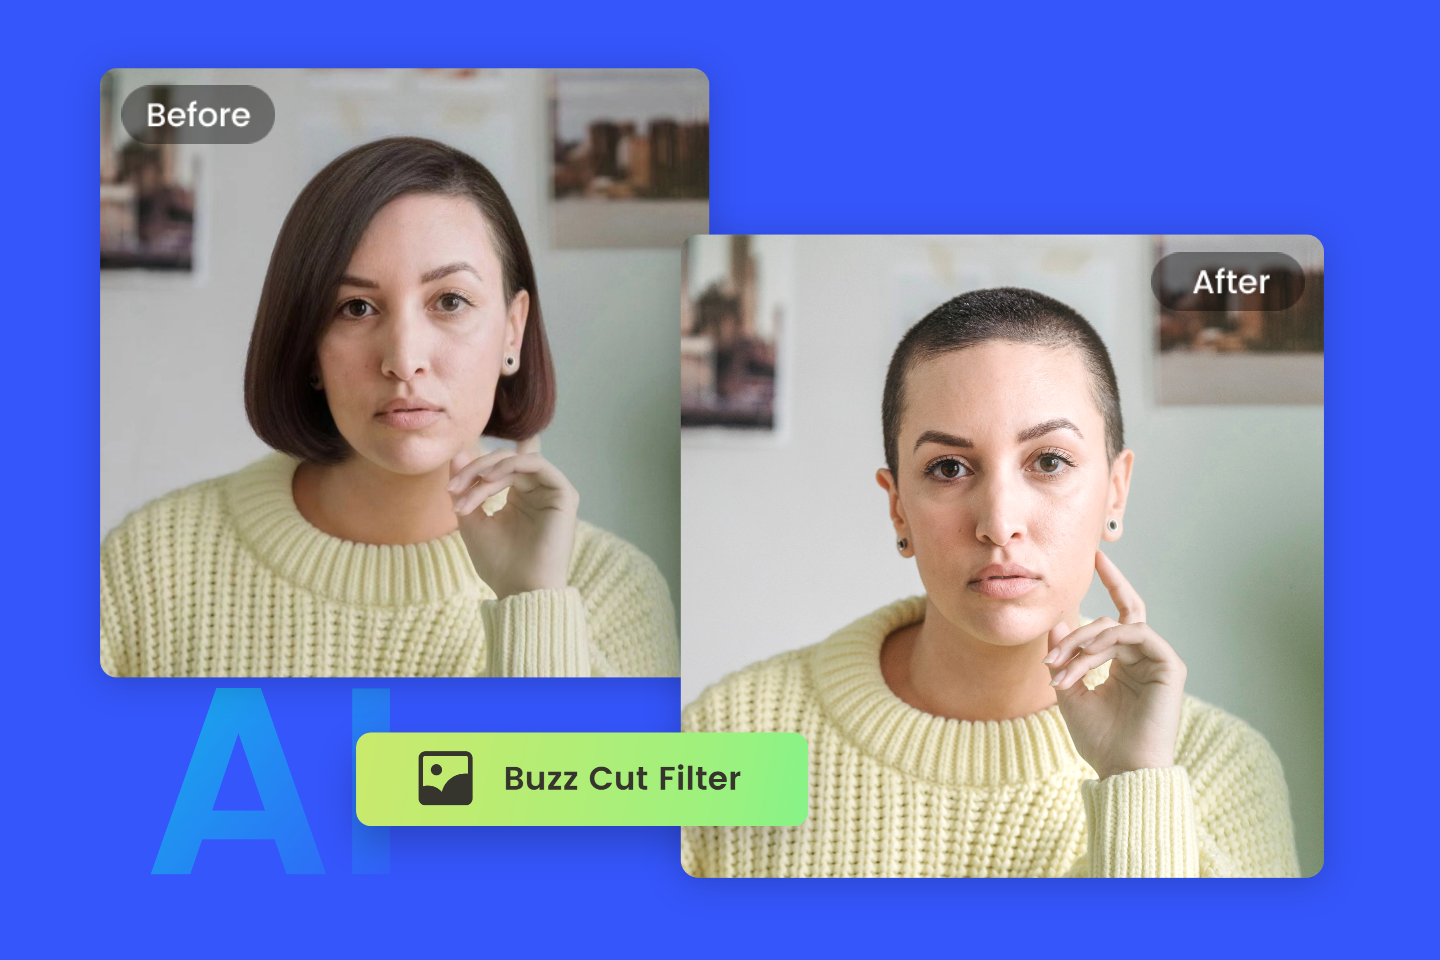 Use fotor online buzz cut filter to transform female bob hairstyle into buzz cut